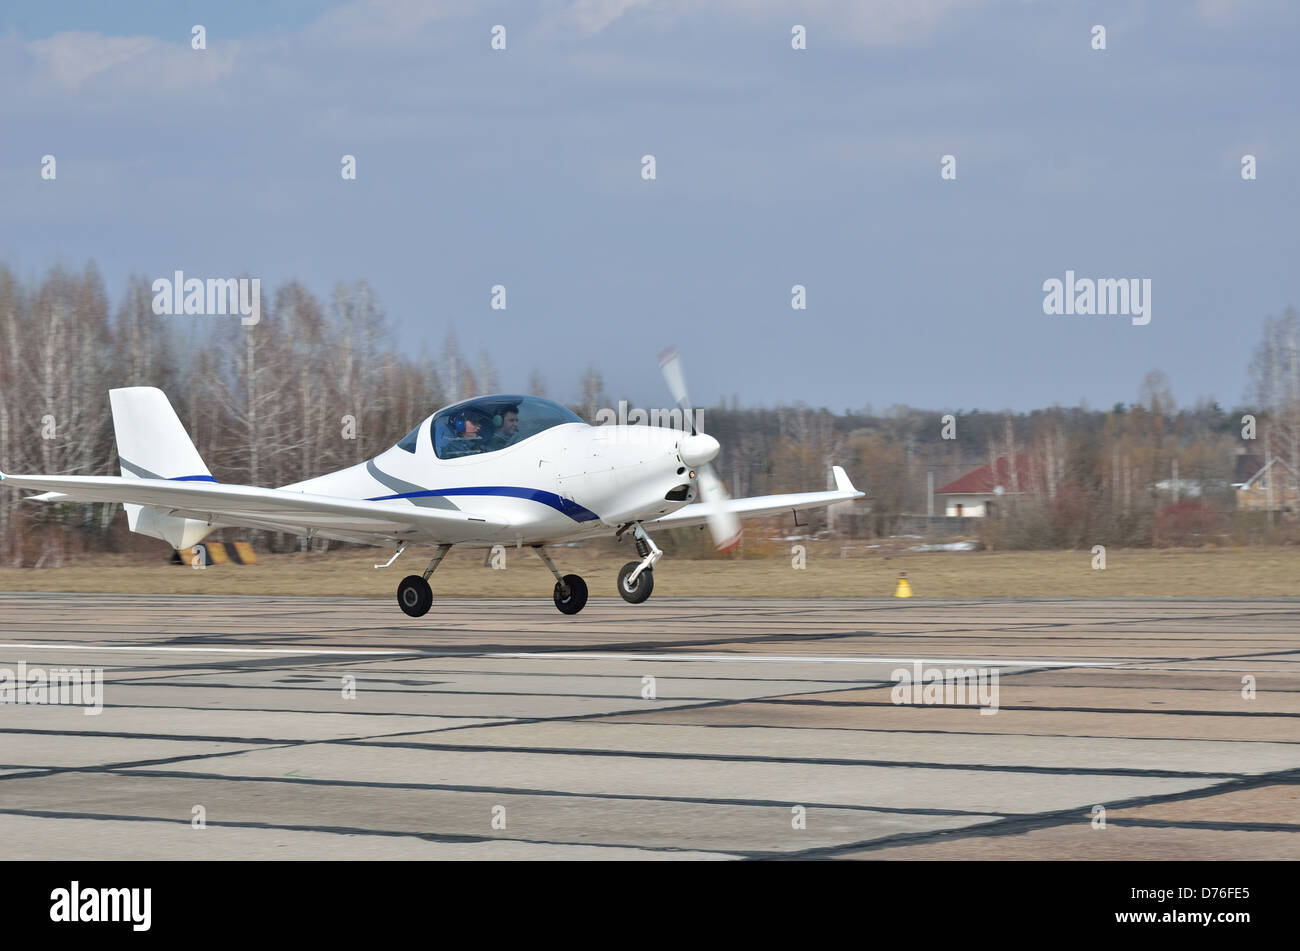 A modern light aircraft landing or taking off Stock Photo